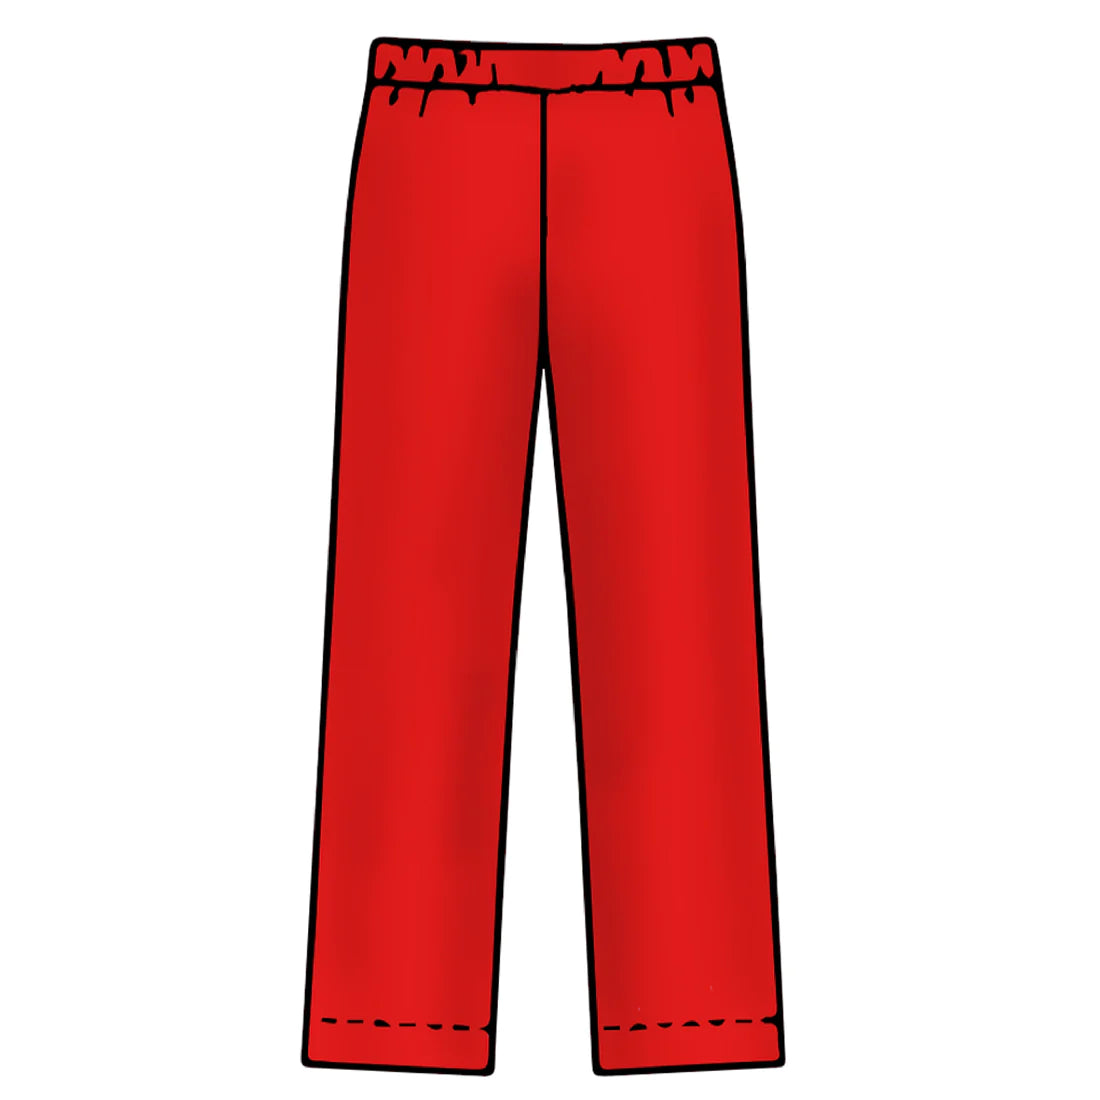 CHRISTMAS PRE-ORDER - Adult Unisex Pajama Pant Only